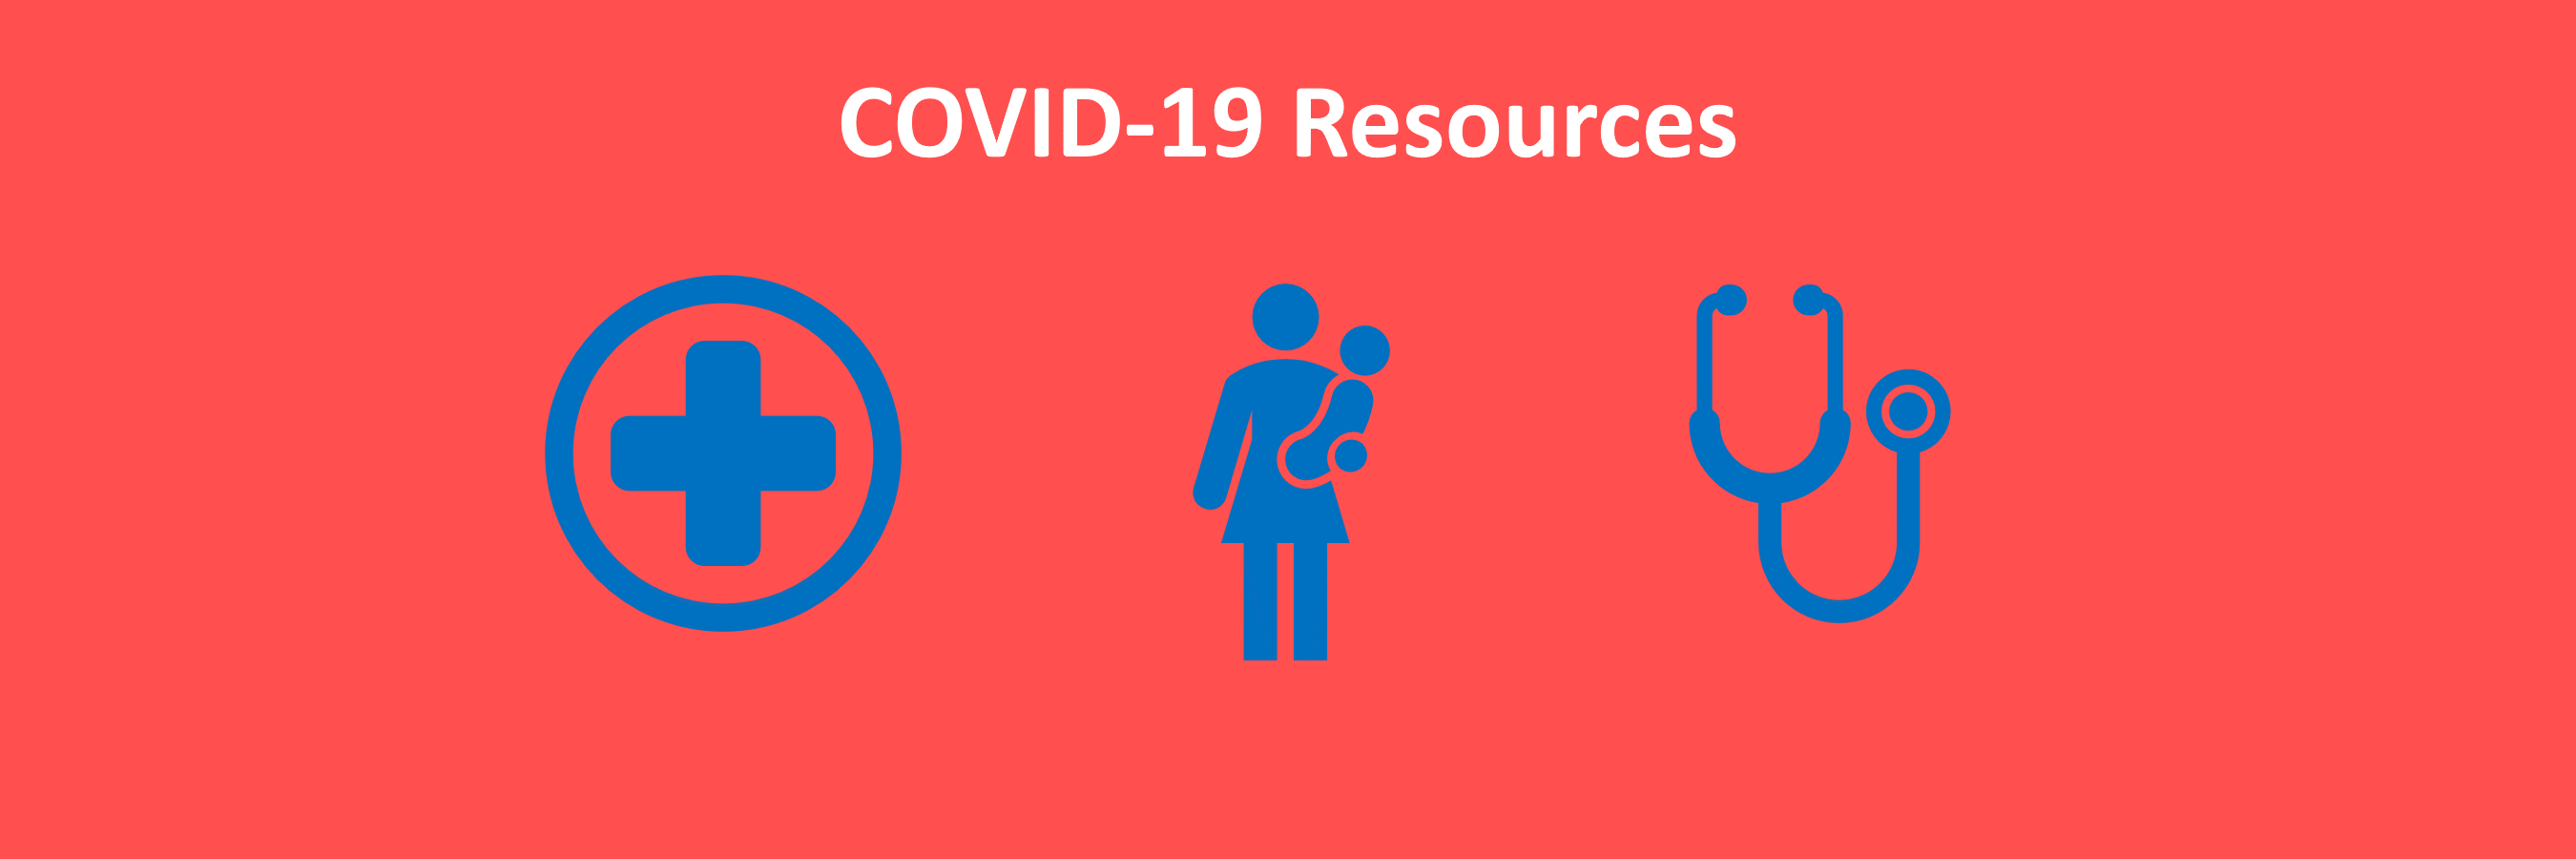 COVID-19 Resources for New Mothers and Care Providers